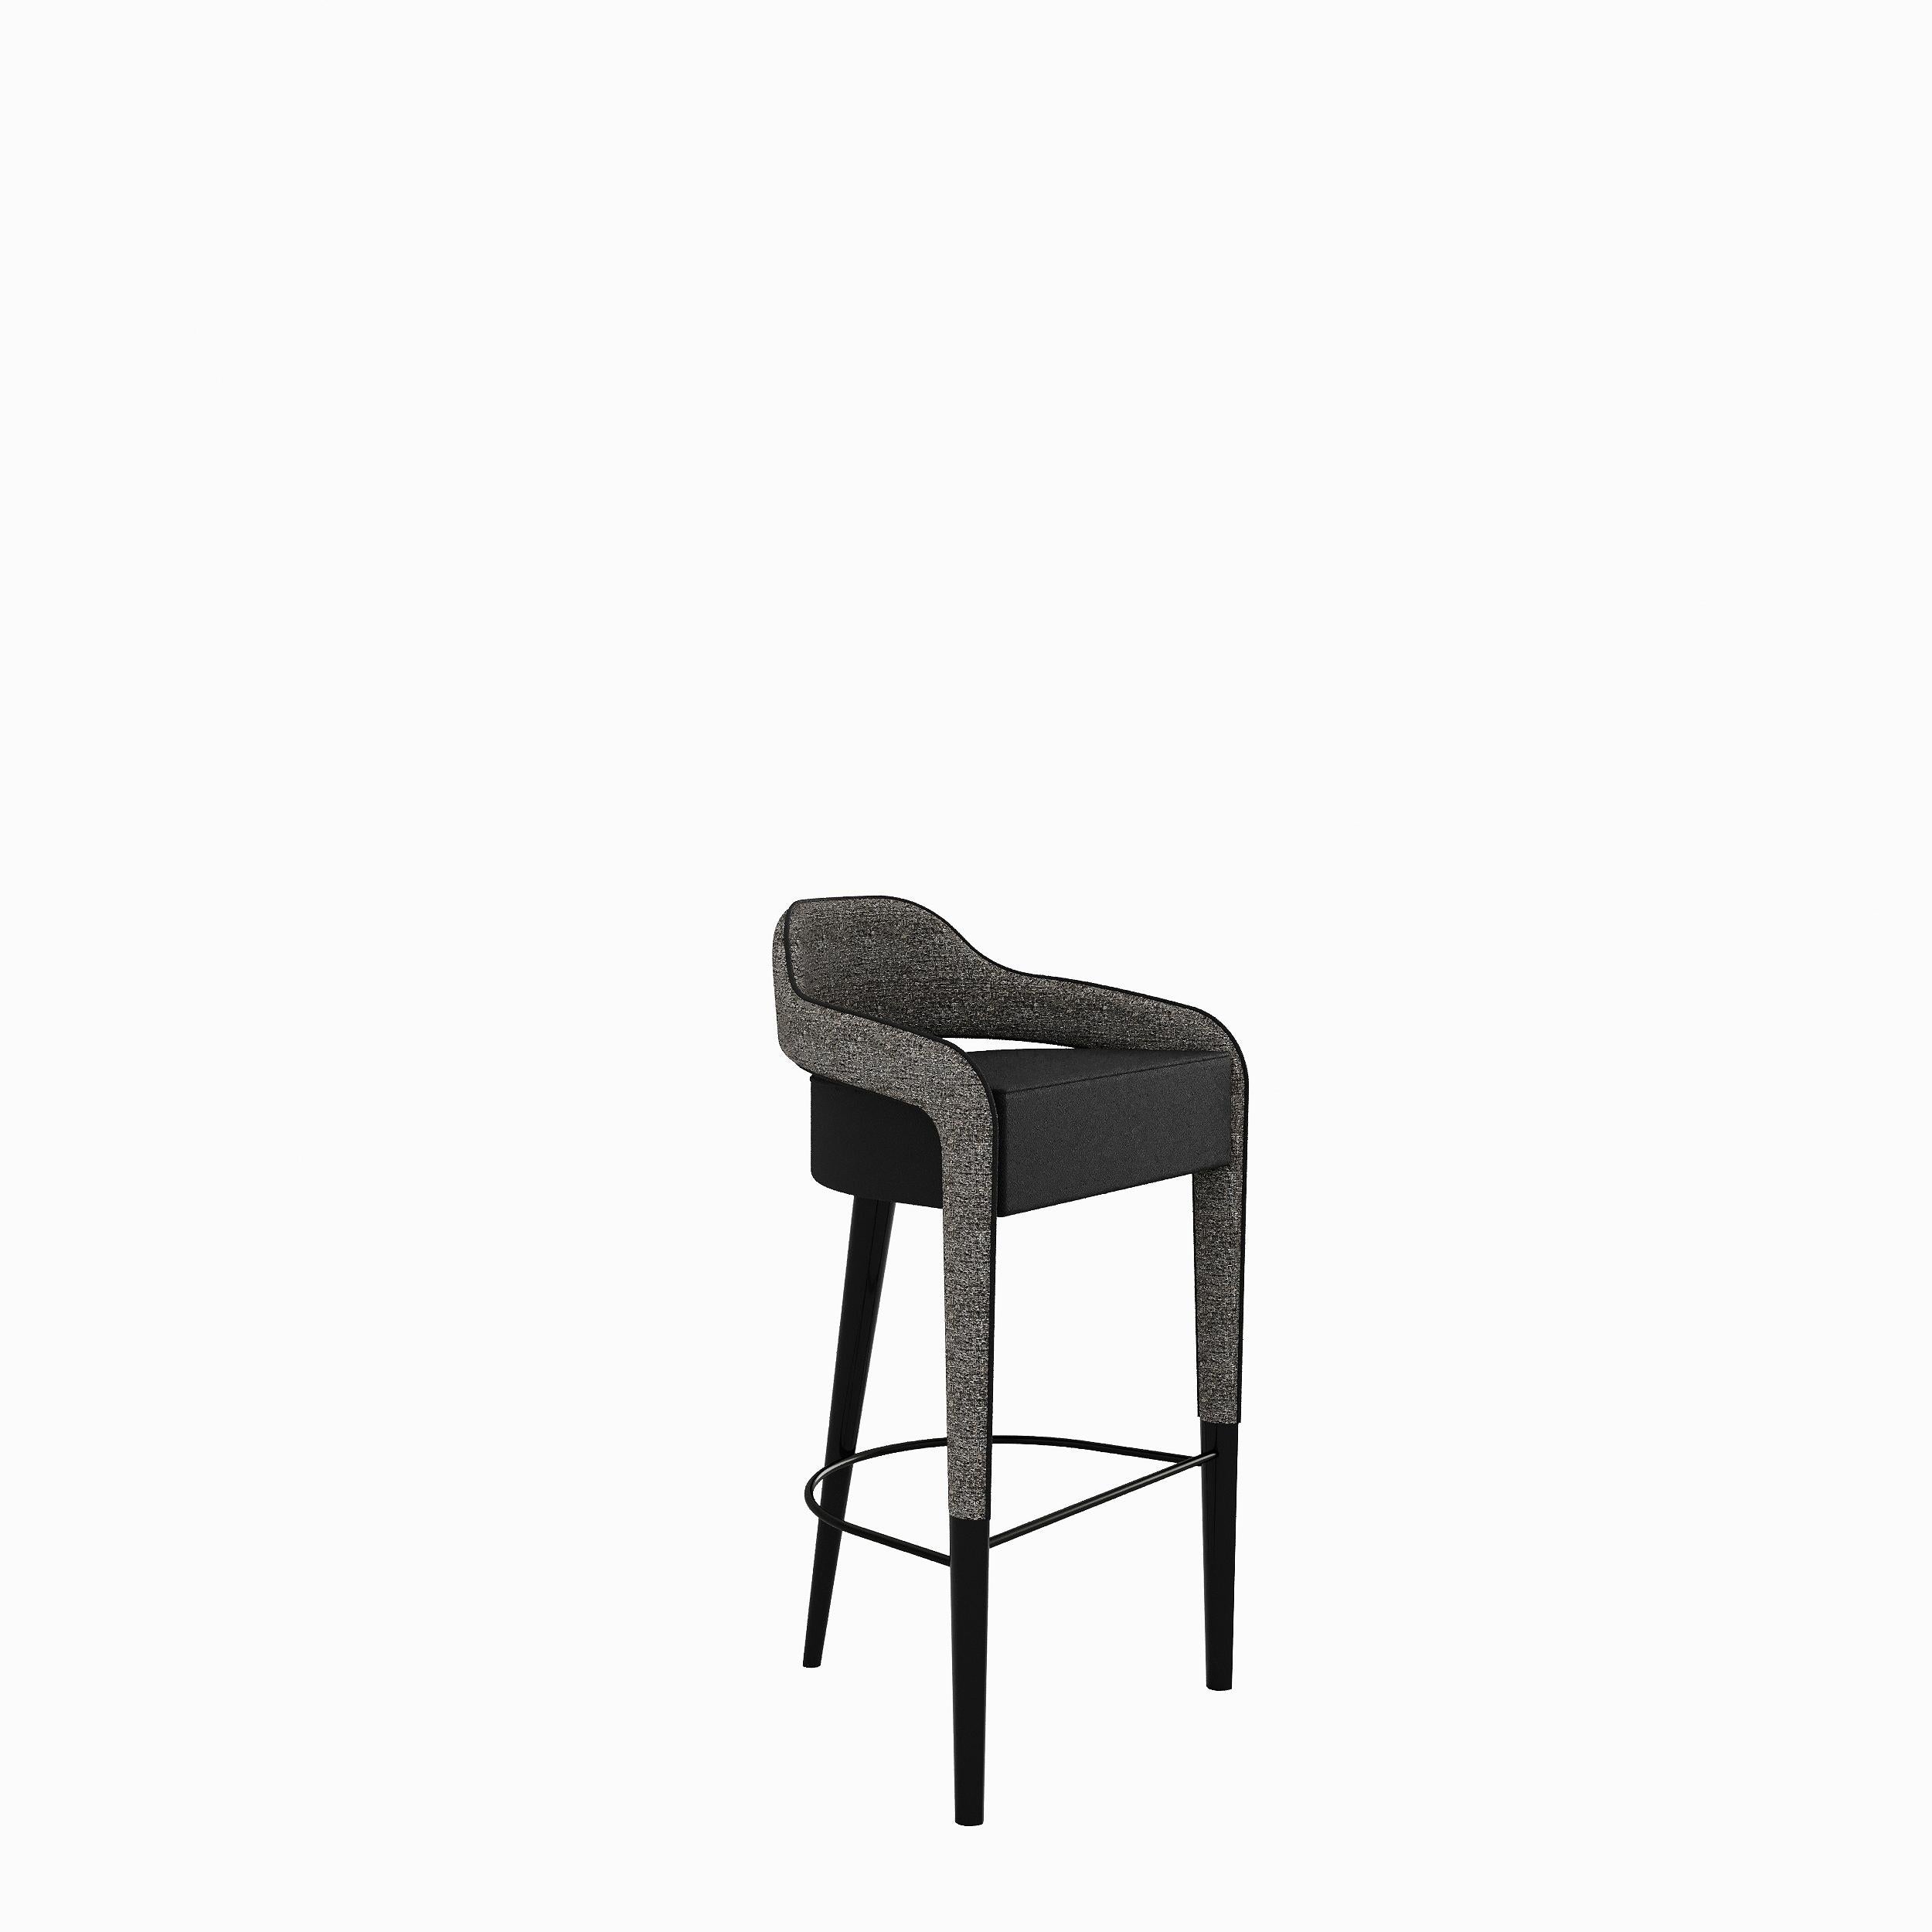 Modern INVICTA Bar Stool with solid wood rear leg For Sale